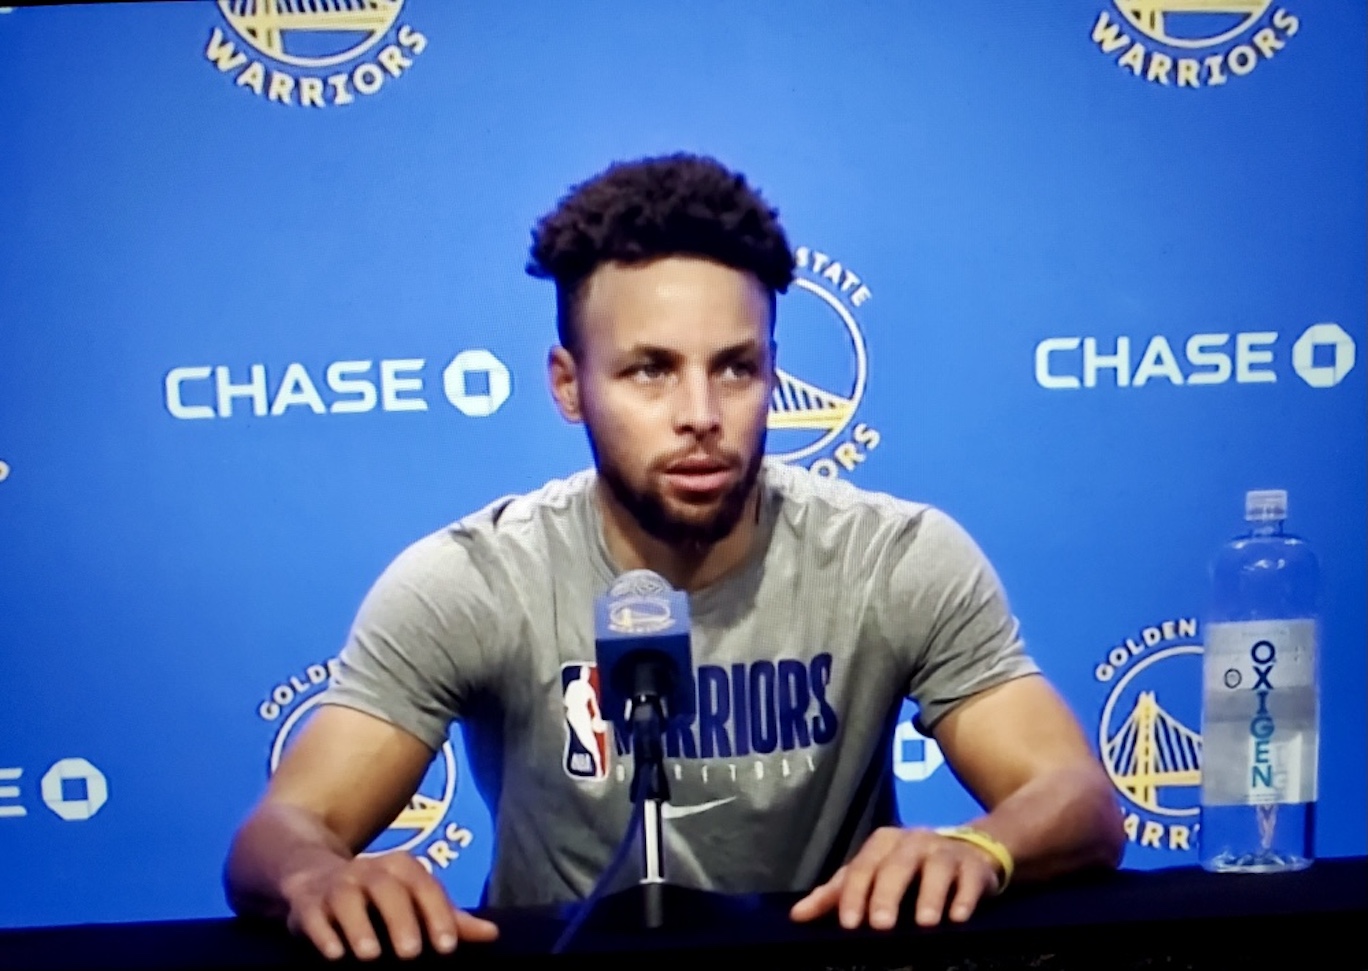 Steph Curry talks with media before tip-off  against the Trail Blazers tonight